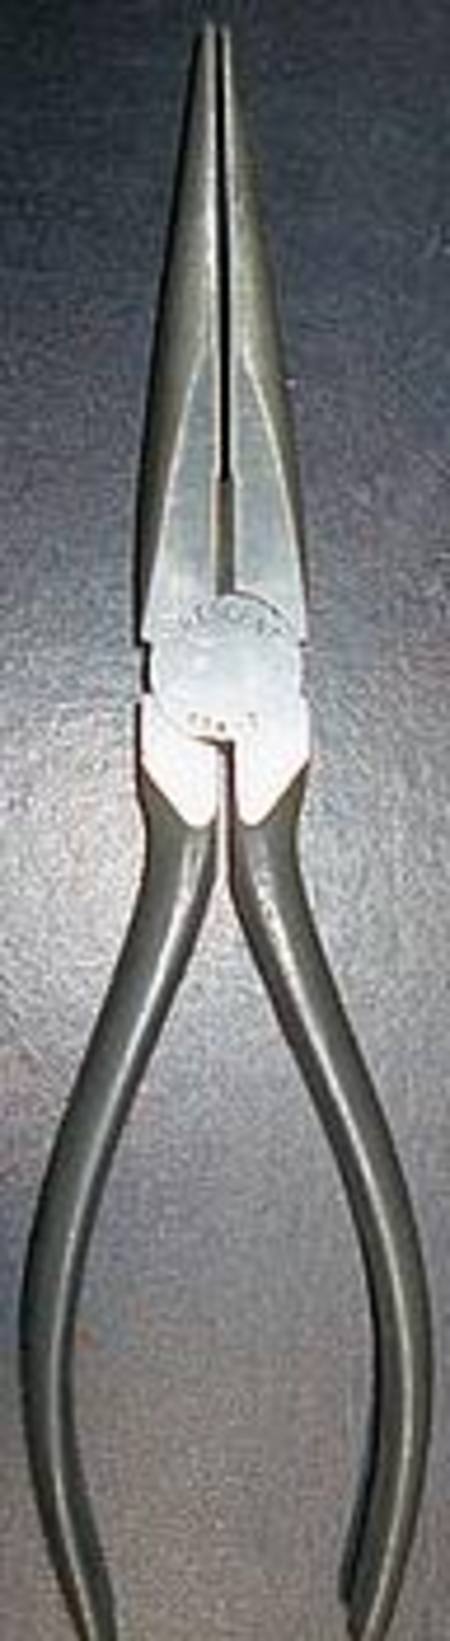 Longnose pliers, various sizes and prices starting at $5